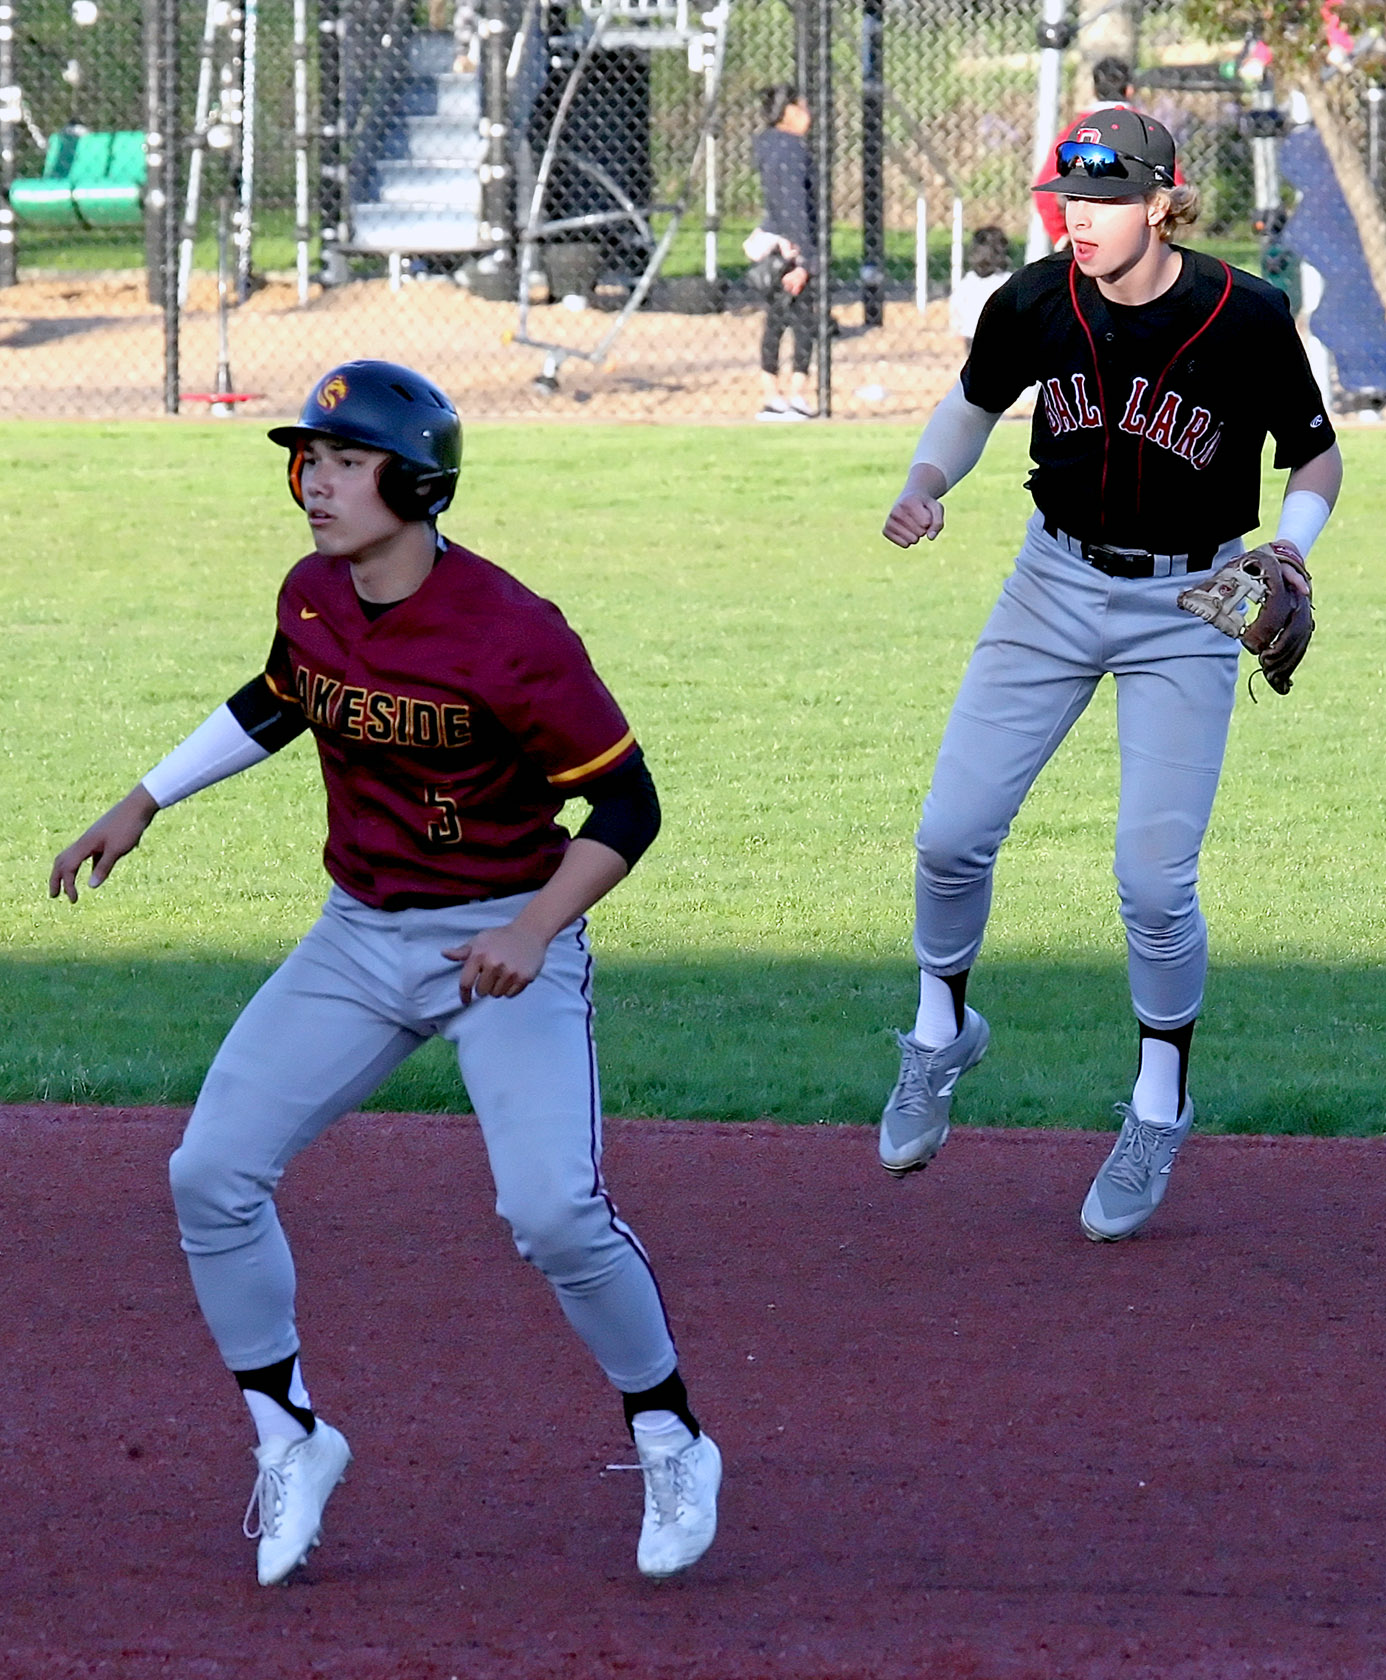 Lakeside base runner Jake Korman and Ballard's shortstop Mason Hoover are caught airborne during a pitch. 